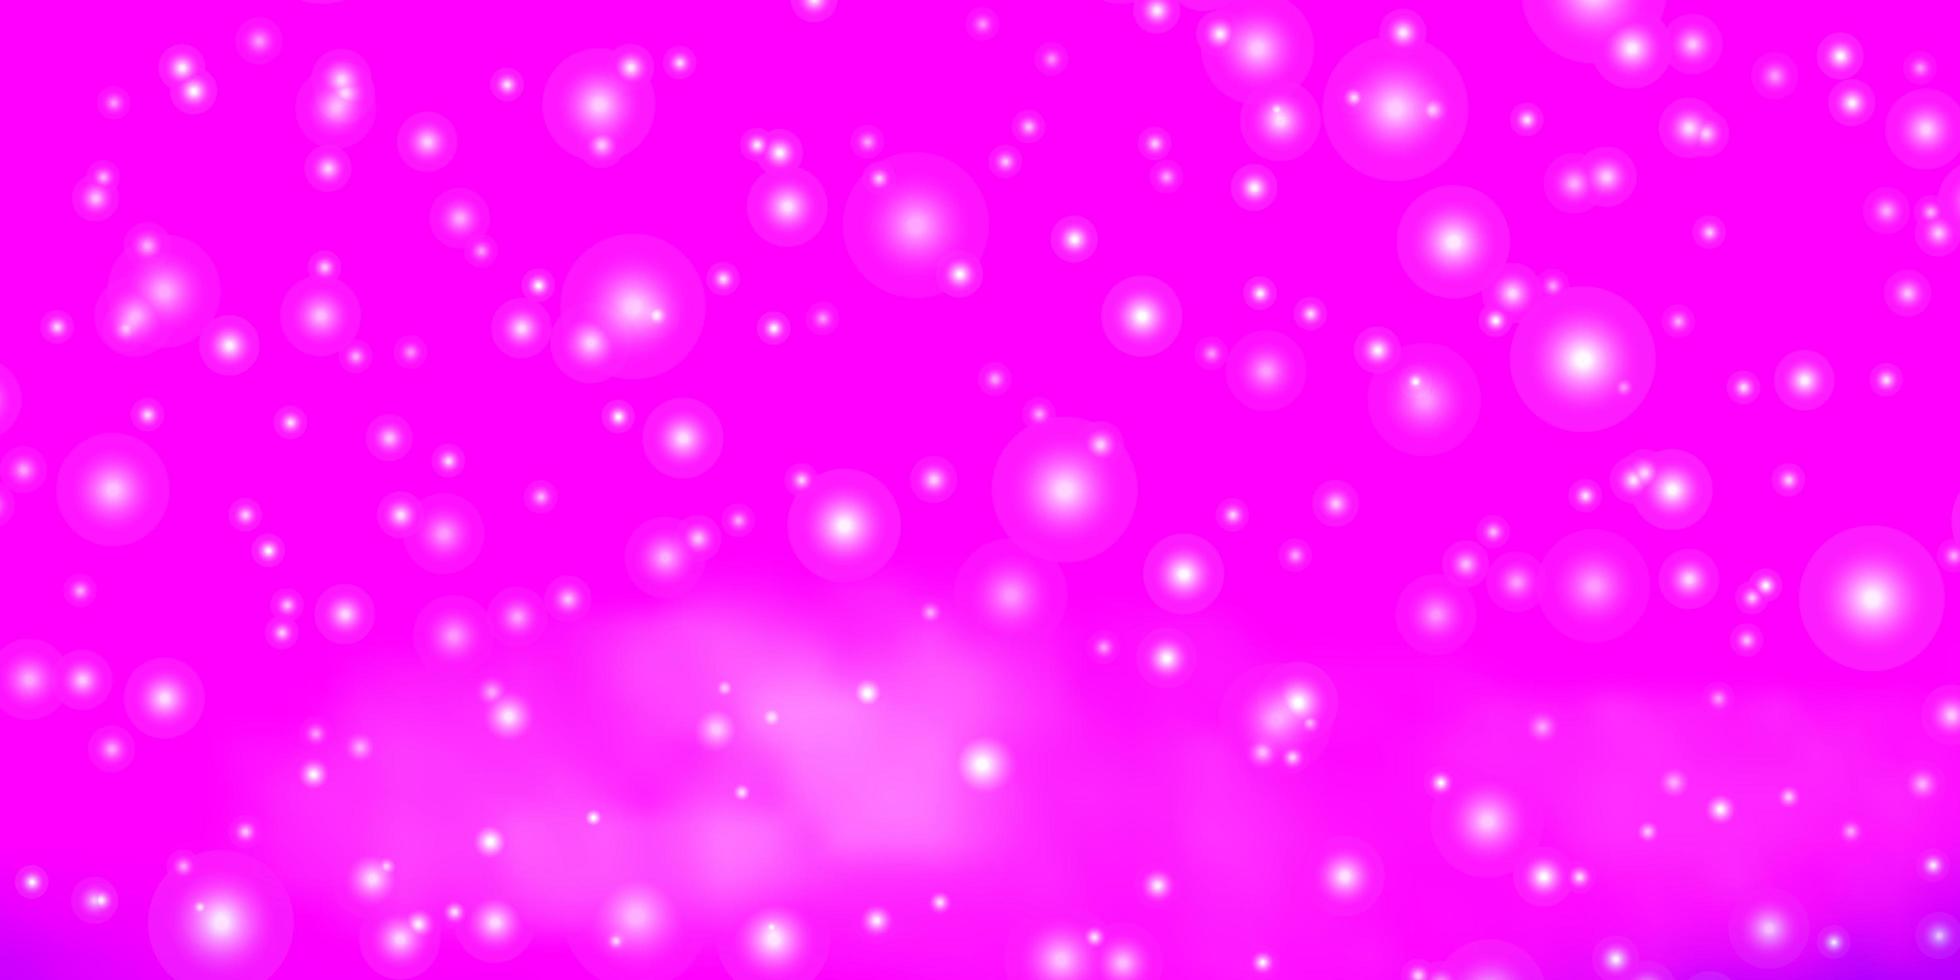 Light Pink, Blue vector texture with beautiful stars.